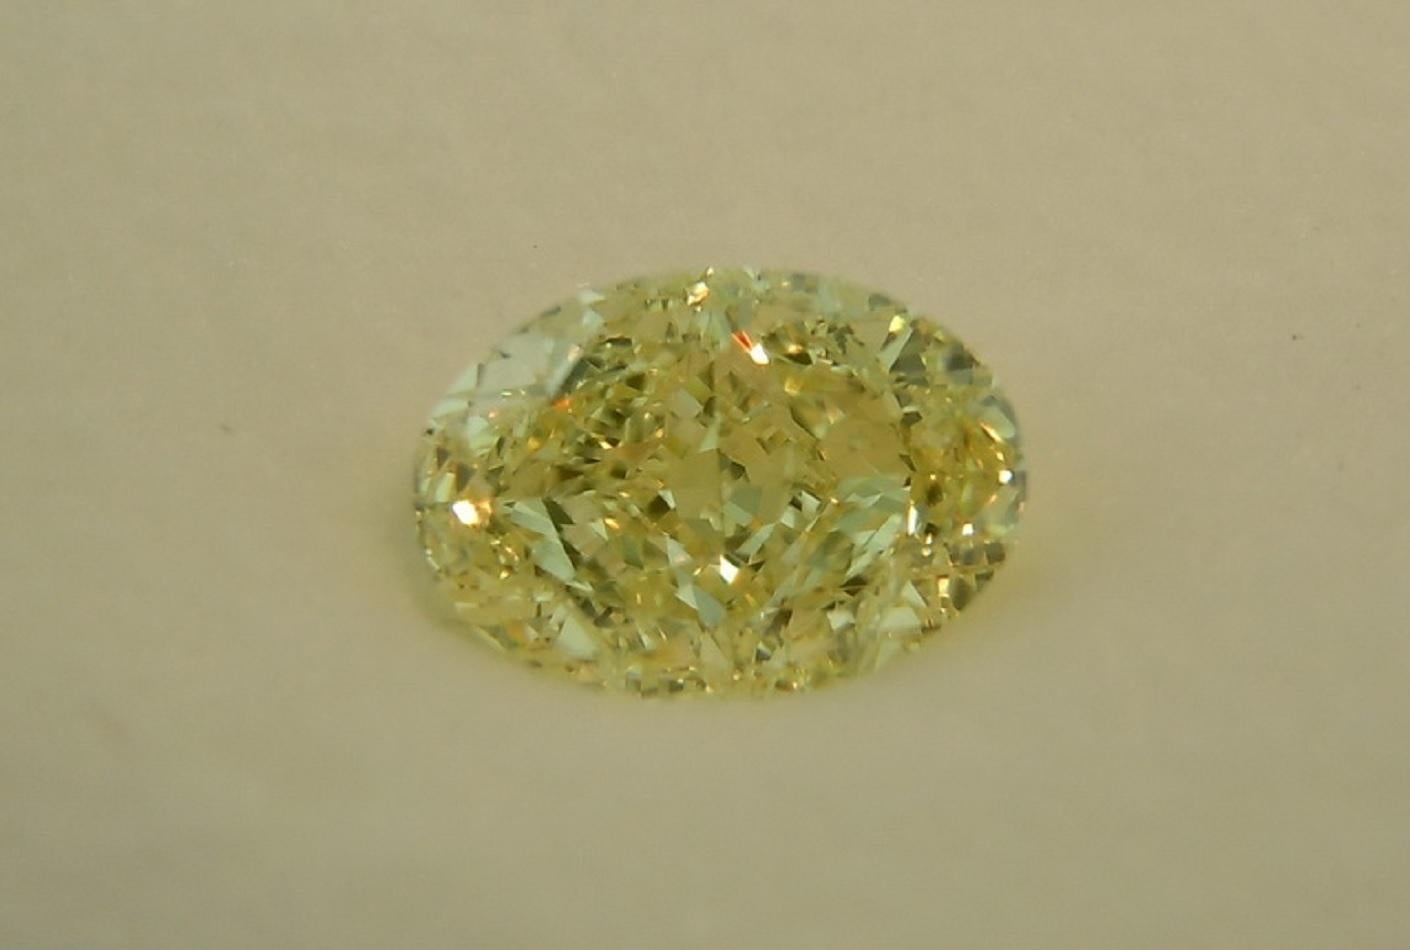 Gia Certified Classic Ring features an 1.71 carat Fancy Light Yellow Oval Diamond with GIA certificate see picture for details of the stone). The center diamond is accompanied by two white trillion  cut diamonds.The mounting is  18 karat white and